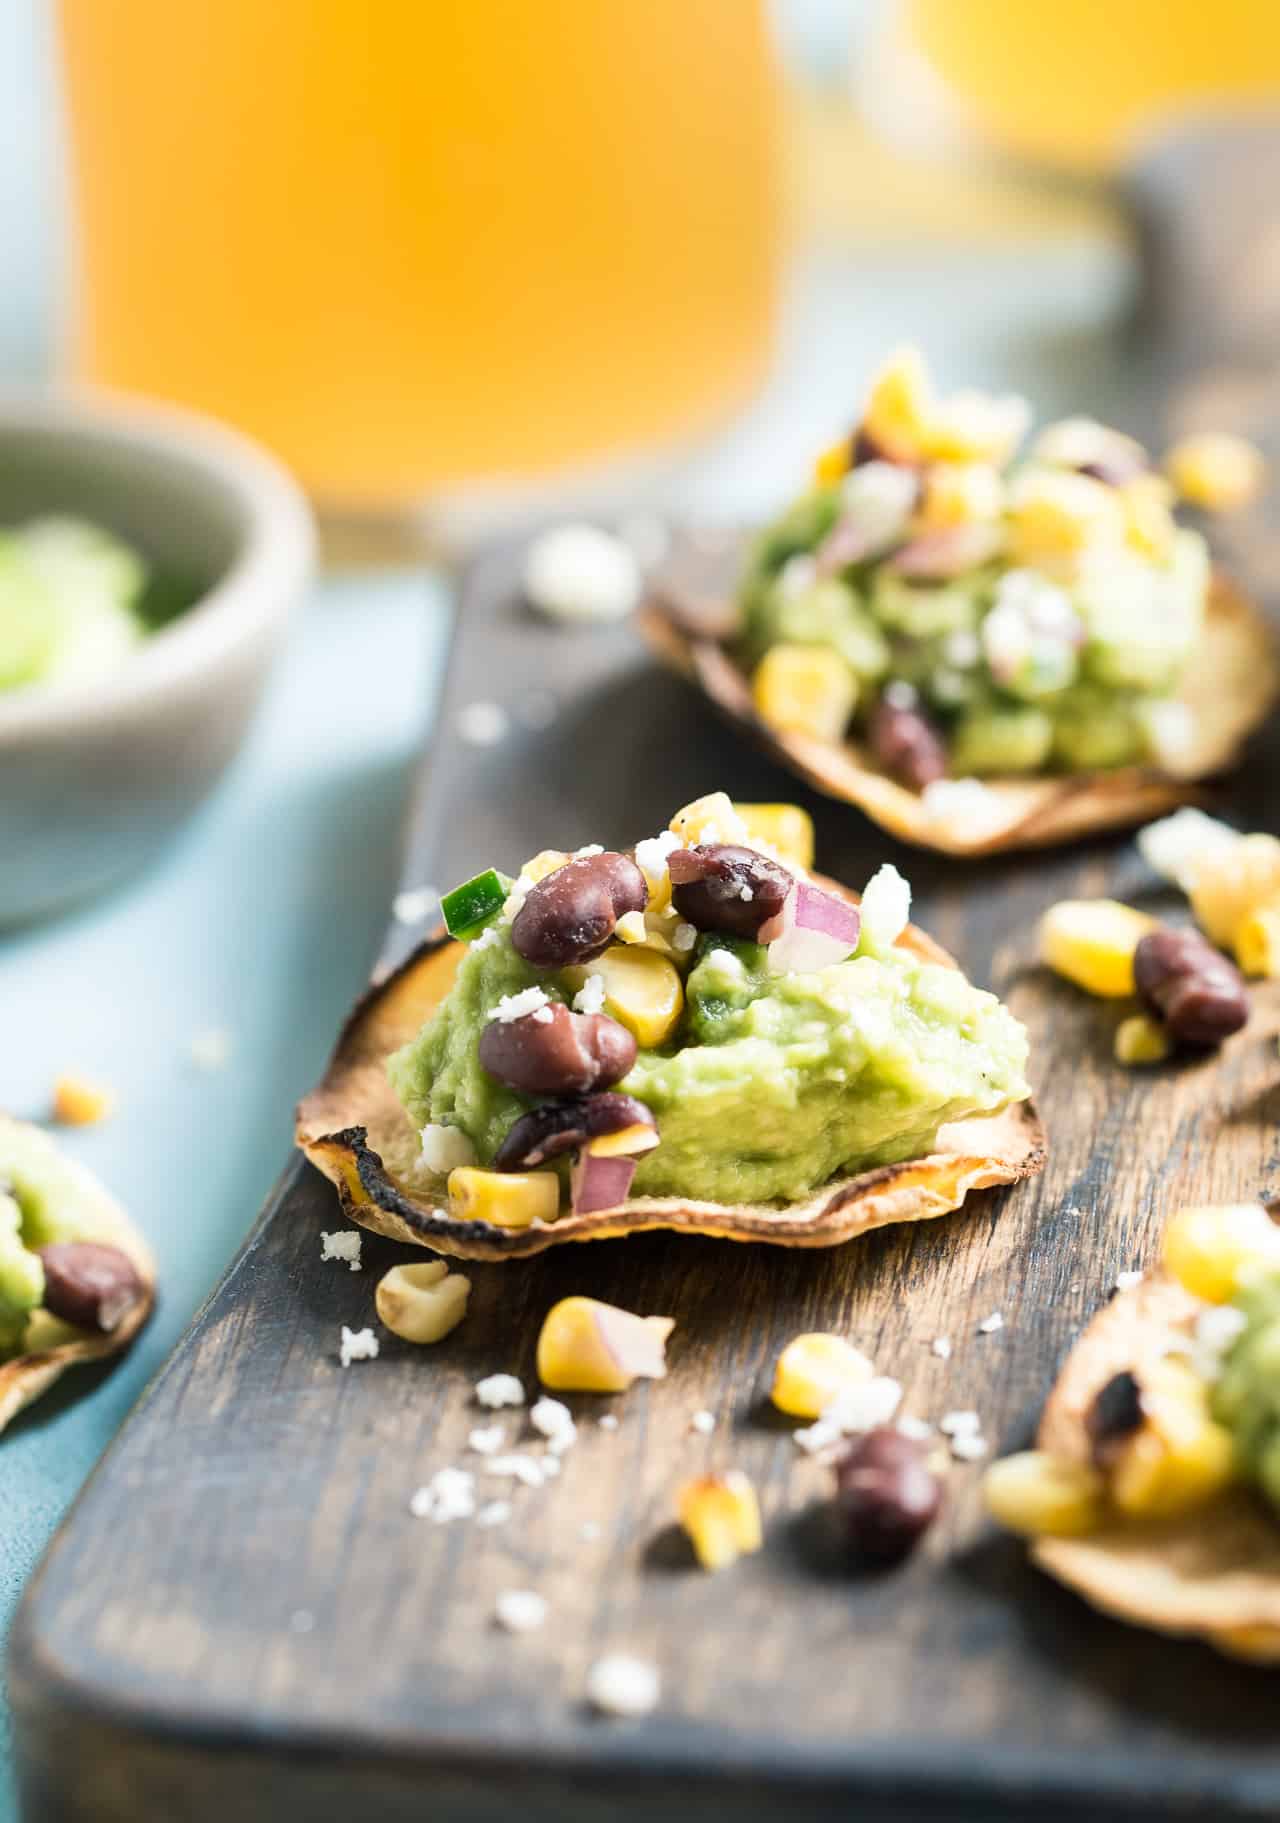 Grilled Corn Salsa & Guacamole Tostadas: This crispy bite-sized appetizer is perfect for football season. They're gluten-free and healthy with a vegan option. 